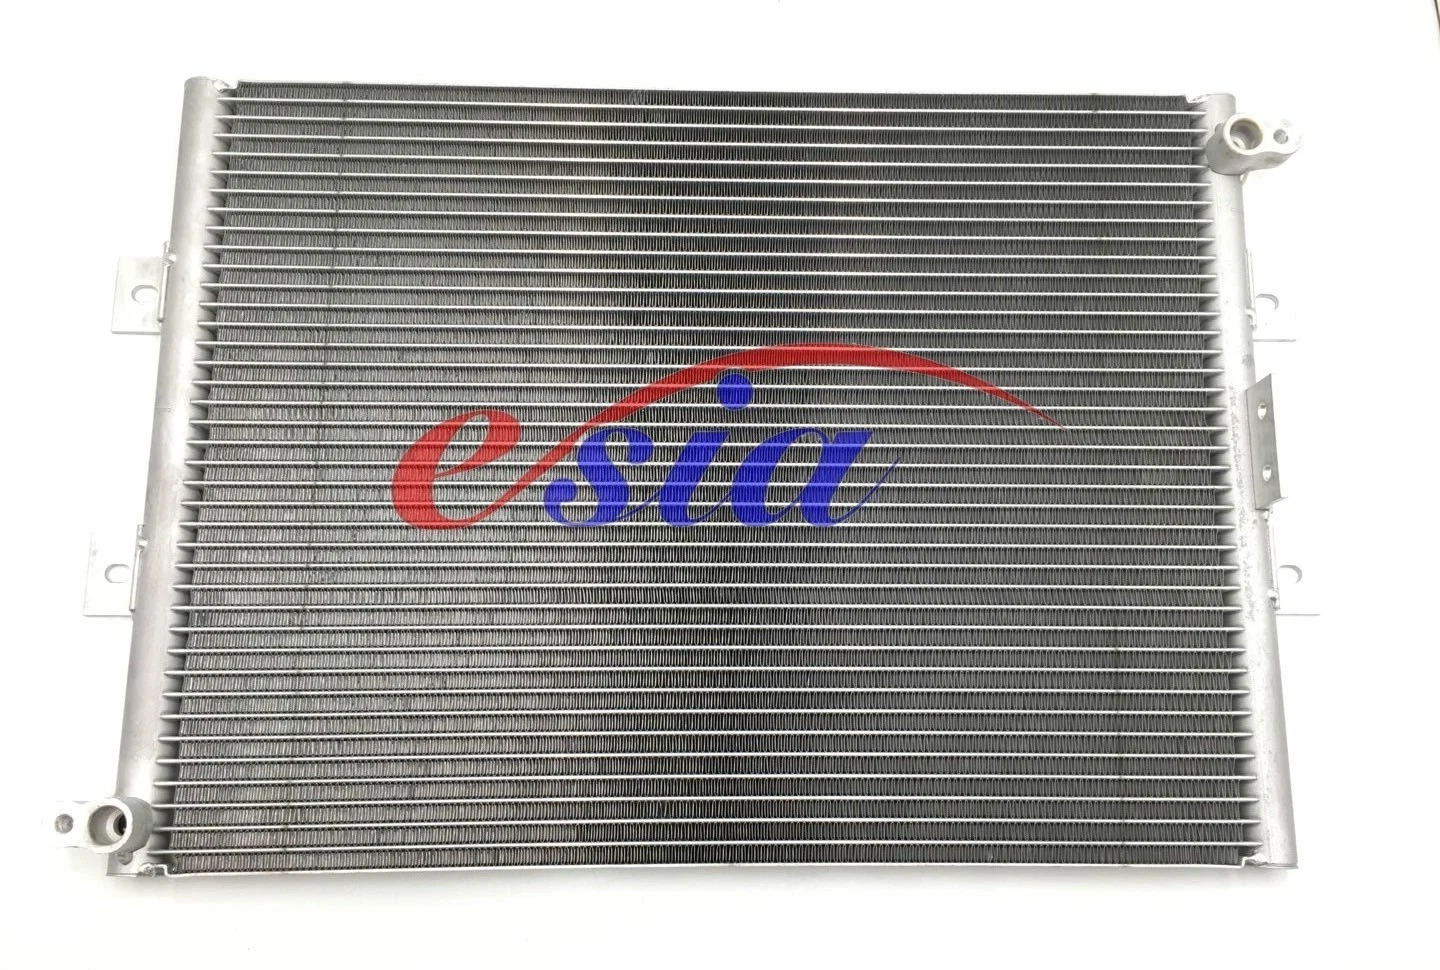 for Toyota Corolla Auto Car AC Air Conditioning Condenser